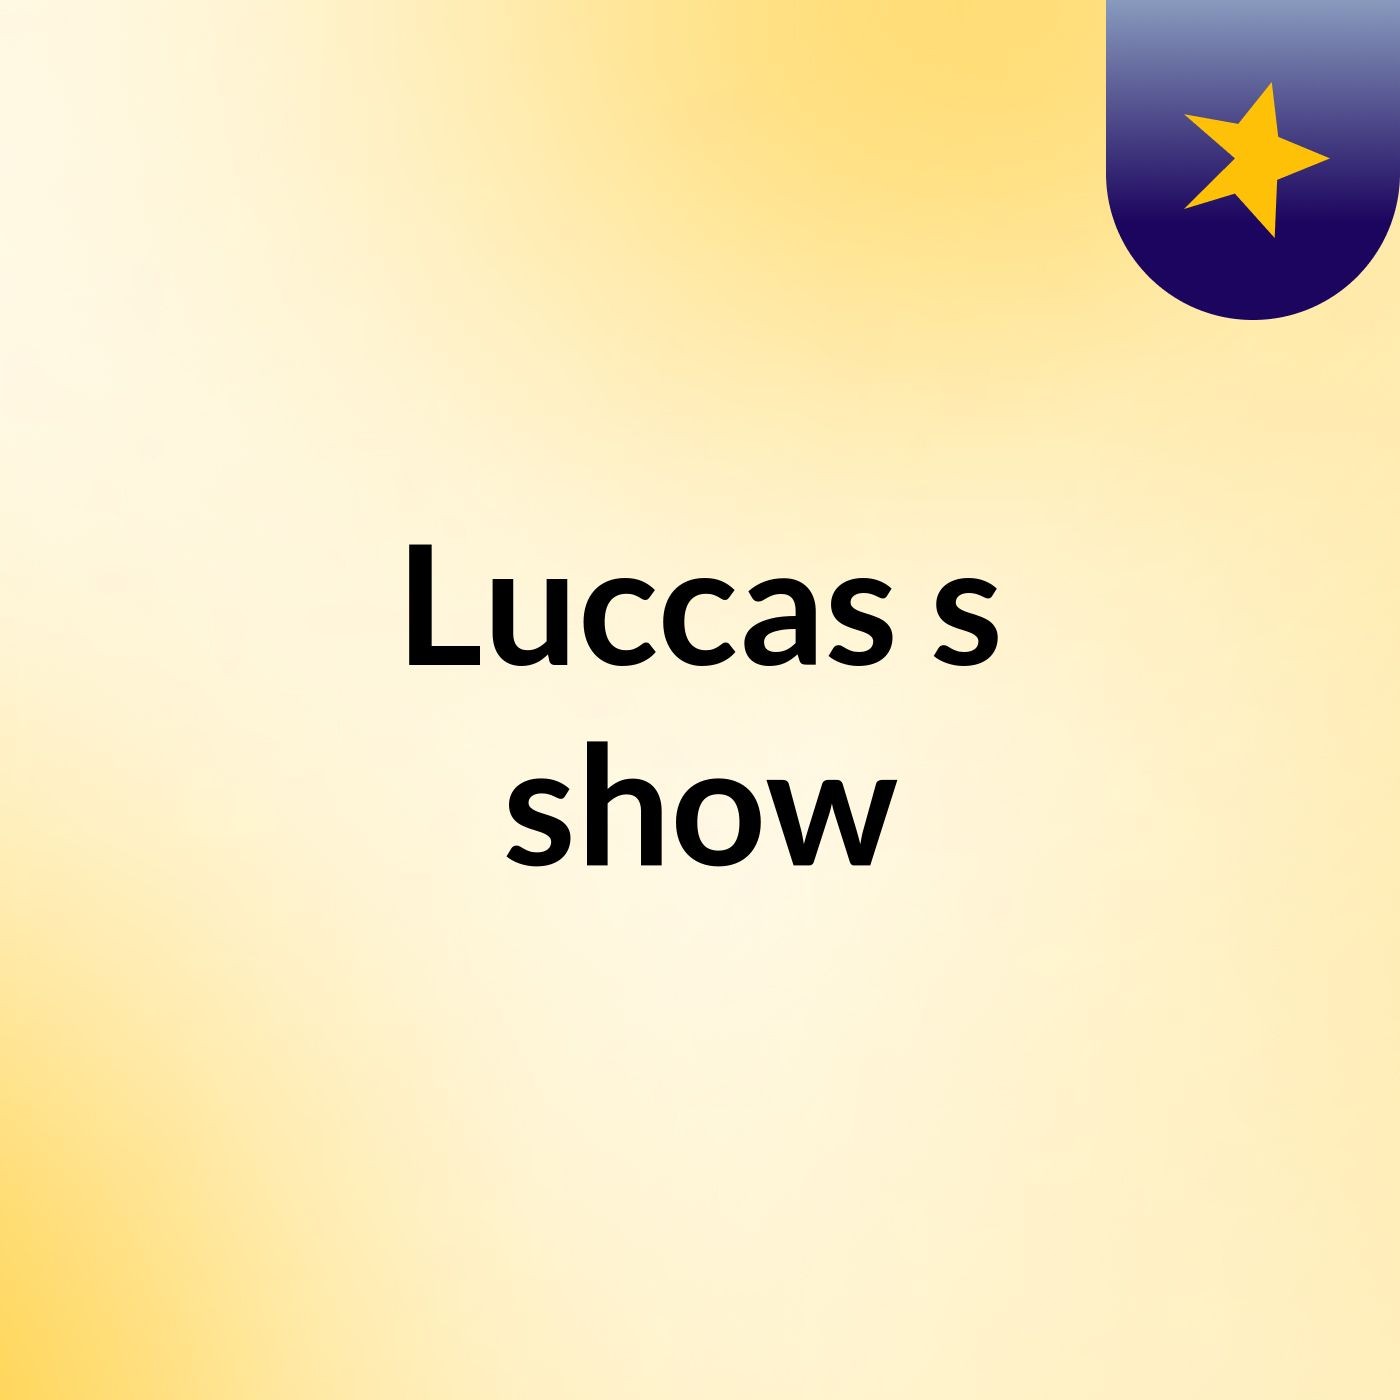 Luccas's show